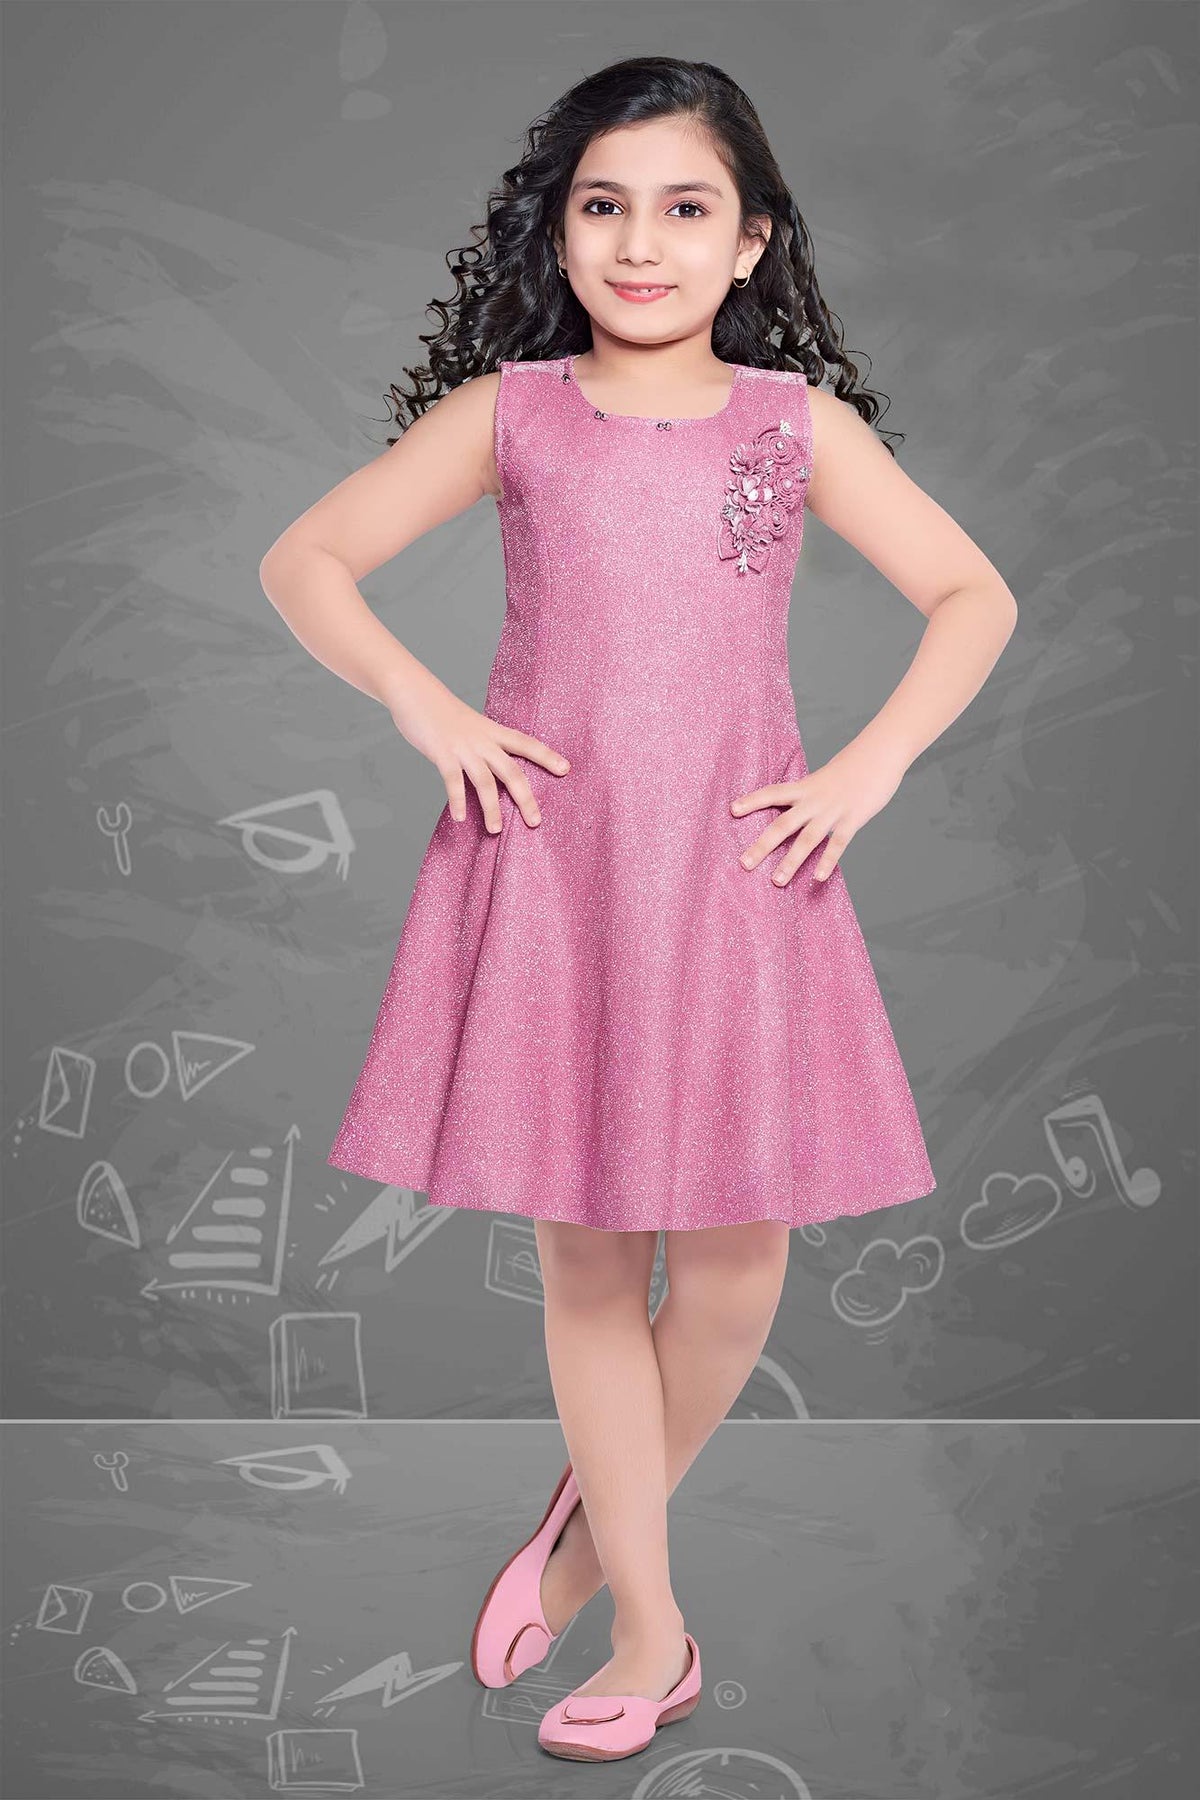 Enchanting Blush Pink Frock with Delicate Neckline for Kids - Lagorii Kids